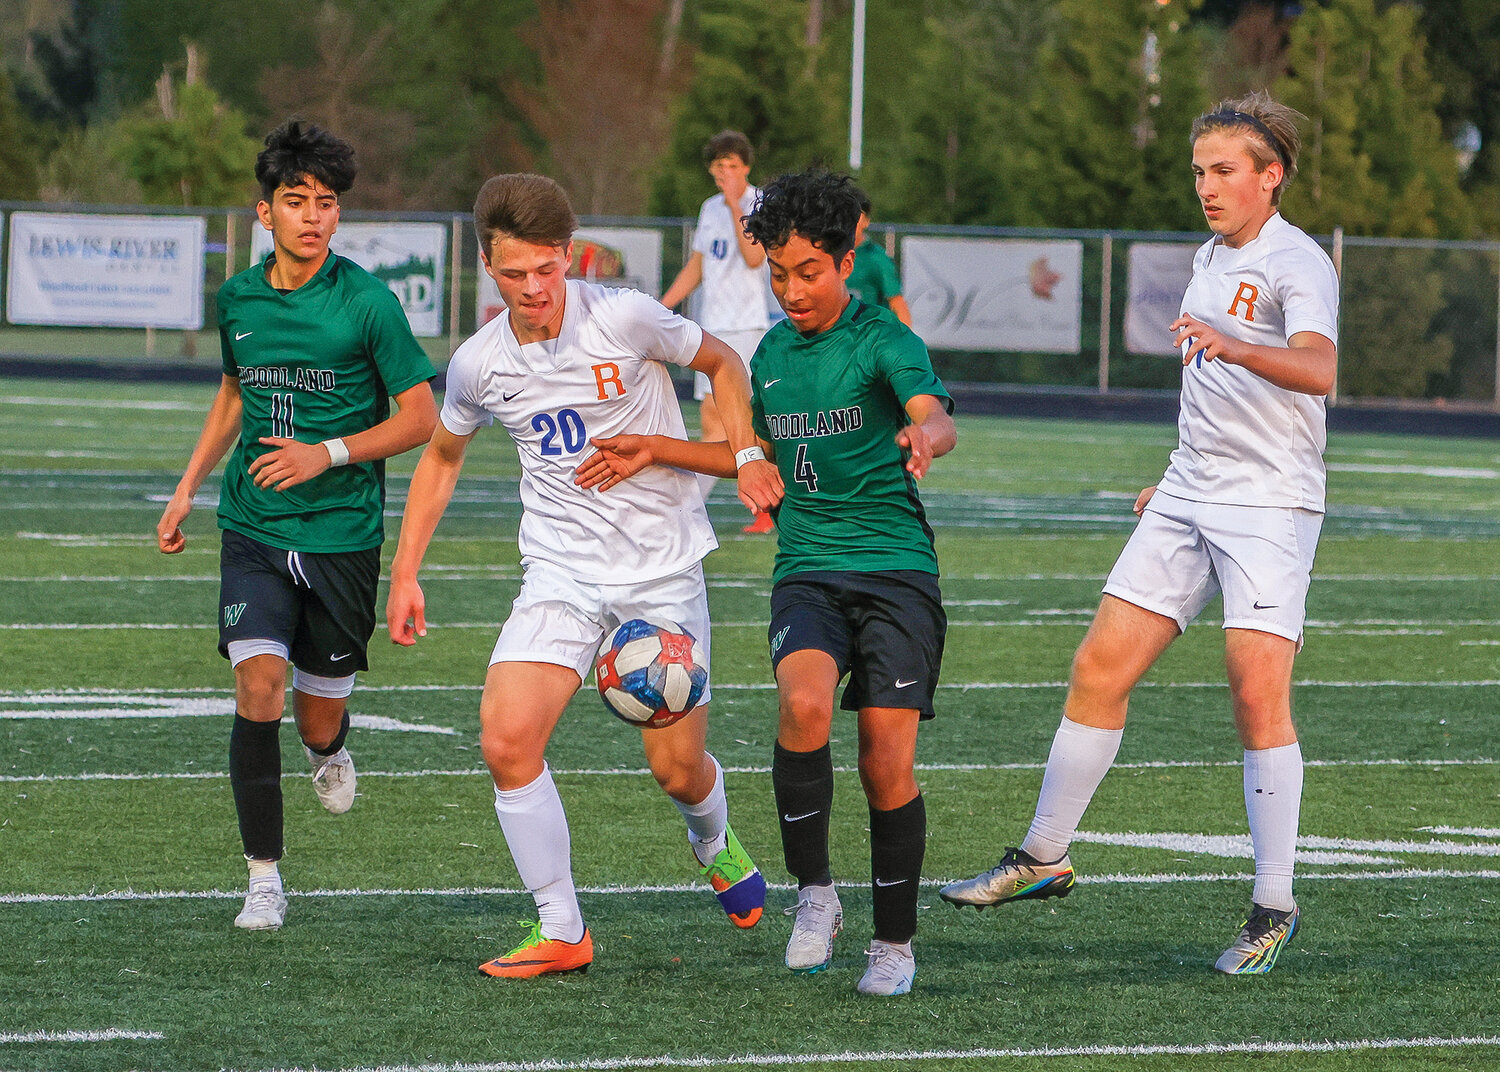 Spudder Carter Thompson, left center, battles for the ball against Woodland's Luis Santos-Mendoza, right center, during Ridgefield's 1-0 win on Thursday, April 27.